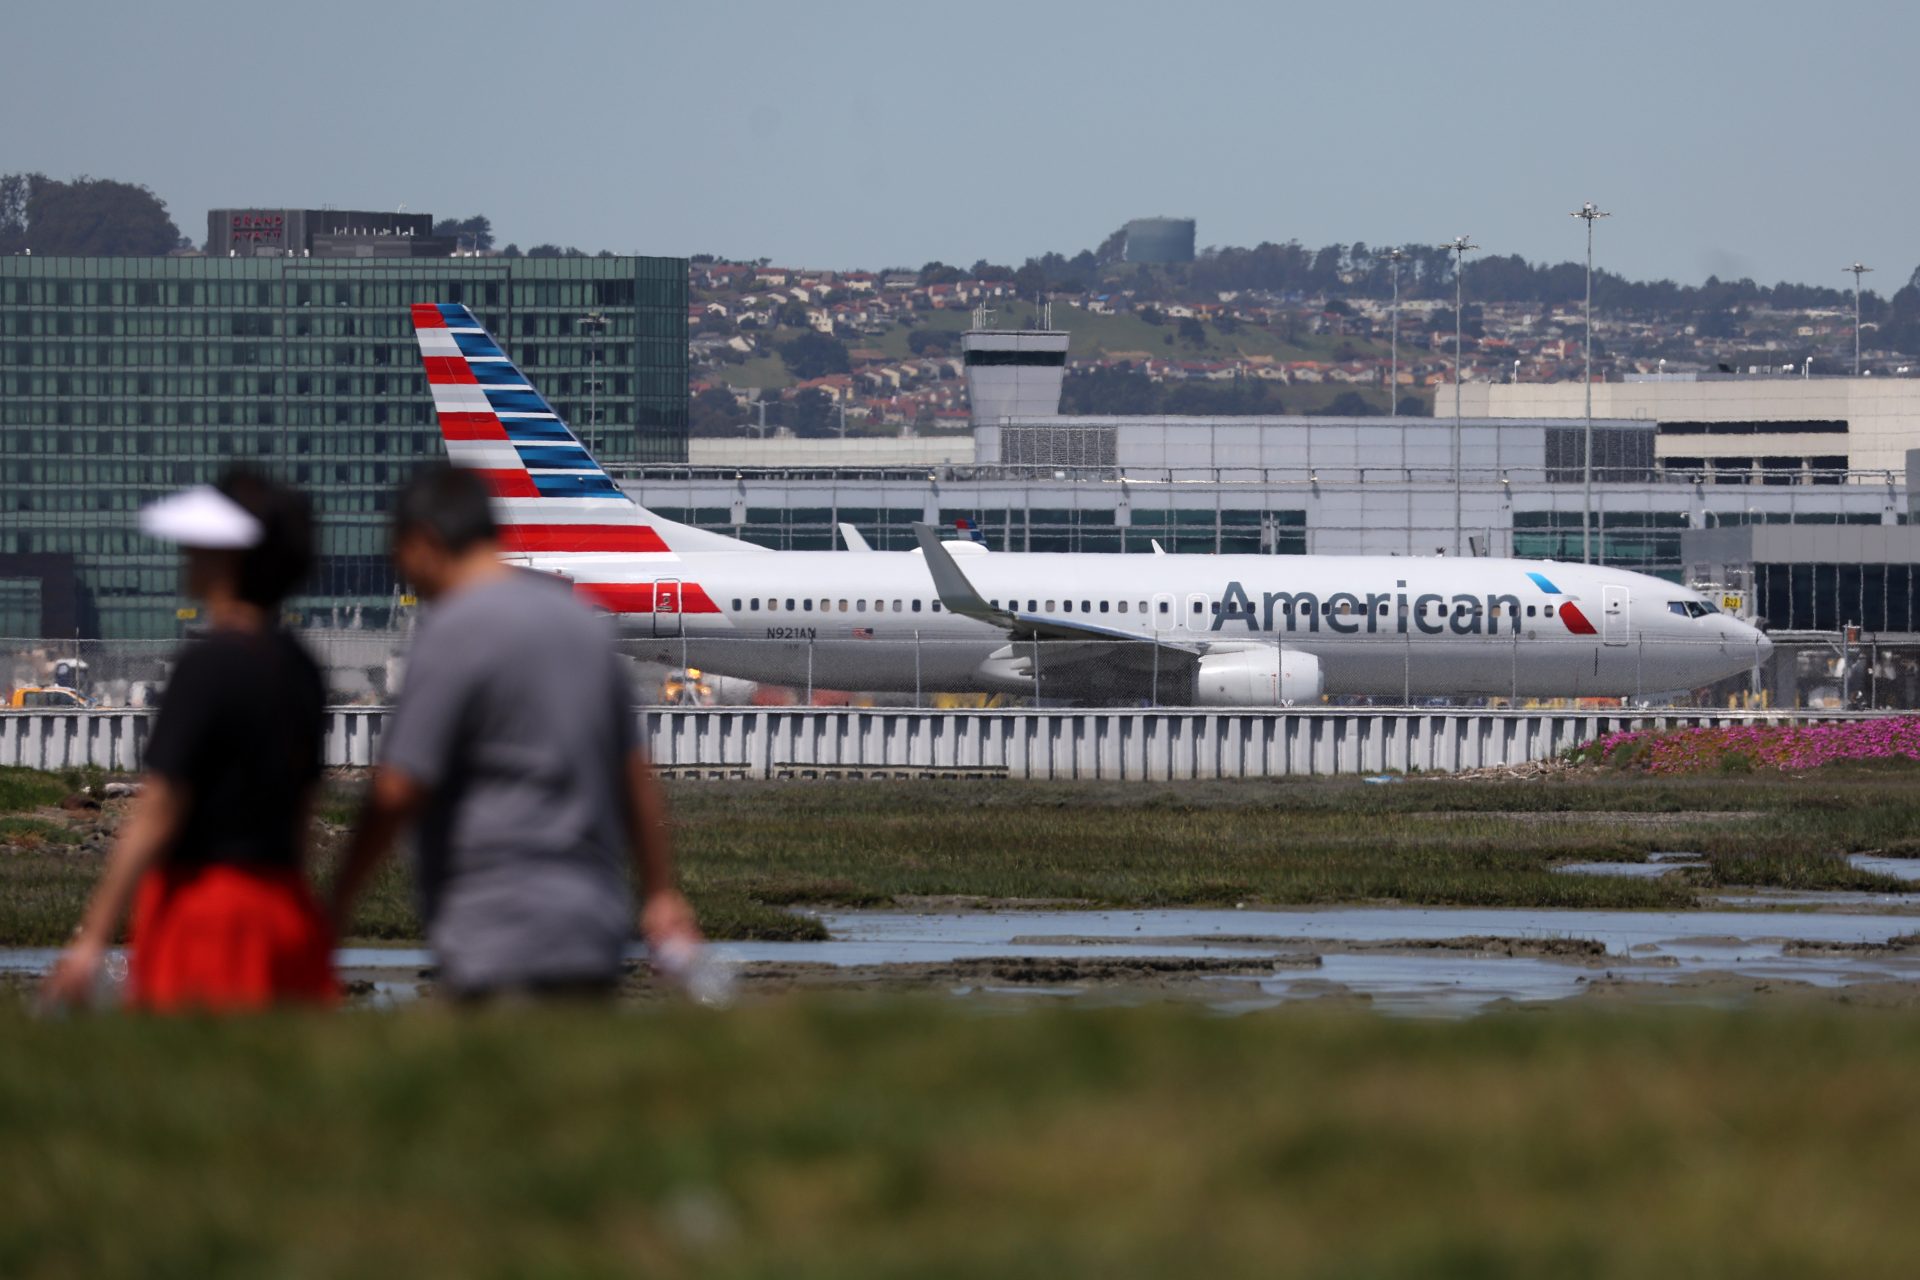 <p><span>We bet you thought you’d see American high on the list but it turns out the airline is pretty bad no matter which way you look at them. They got a final score of 47.06 but that wasn't enough to make them the worst company to fly with on WalletHub’s ranking. </span></p>